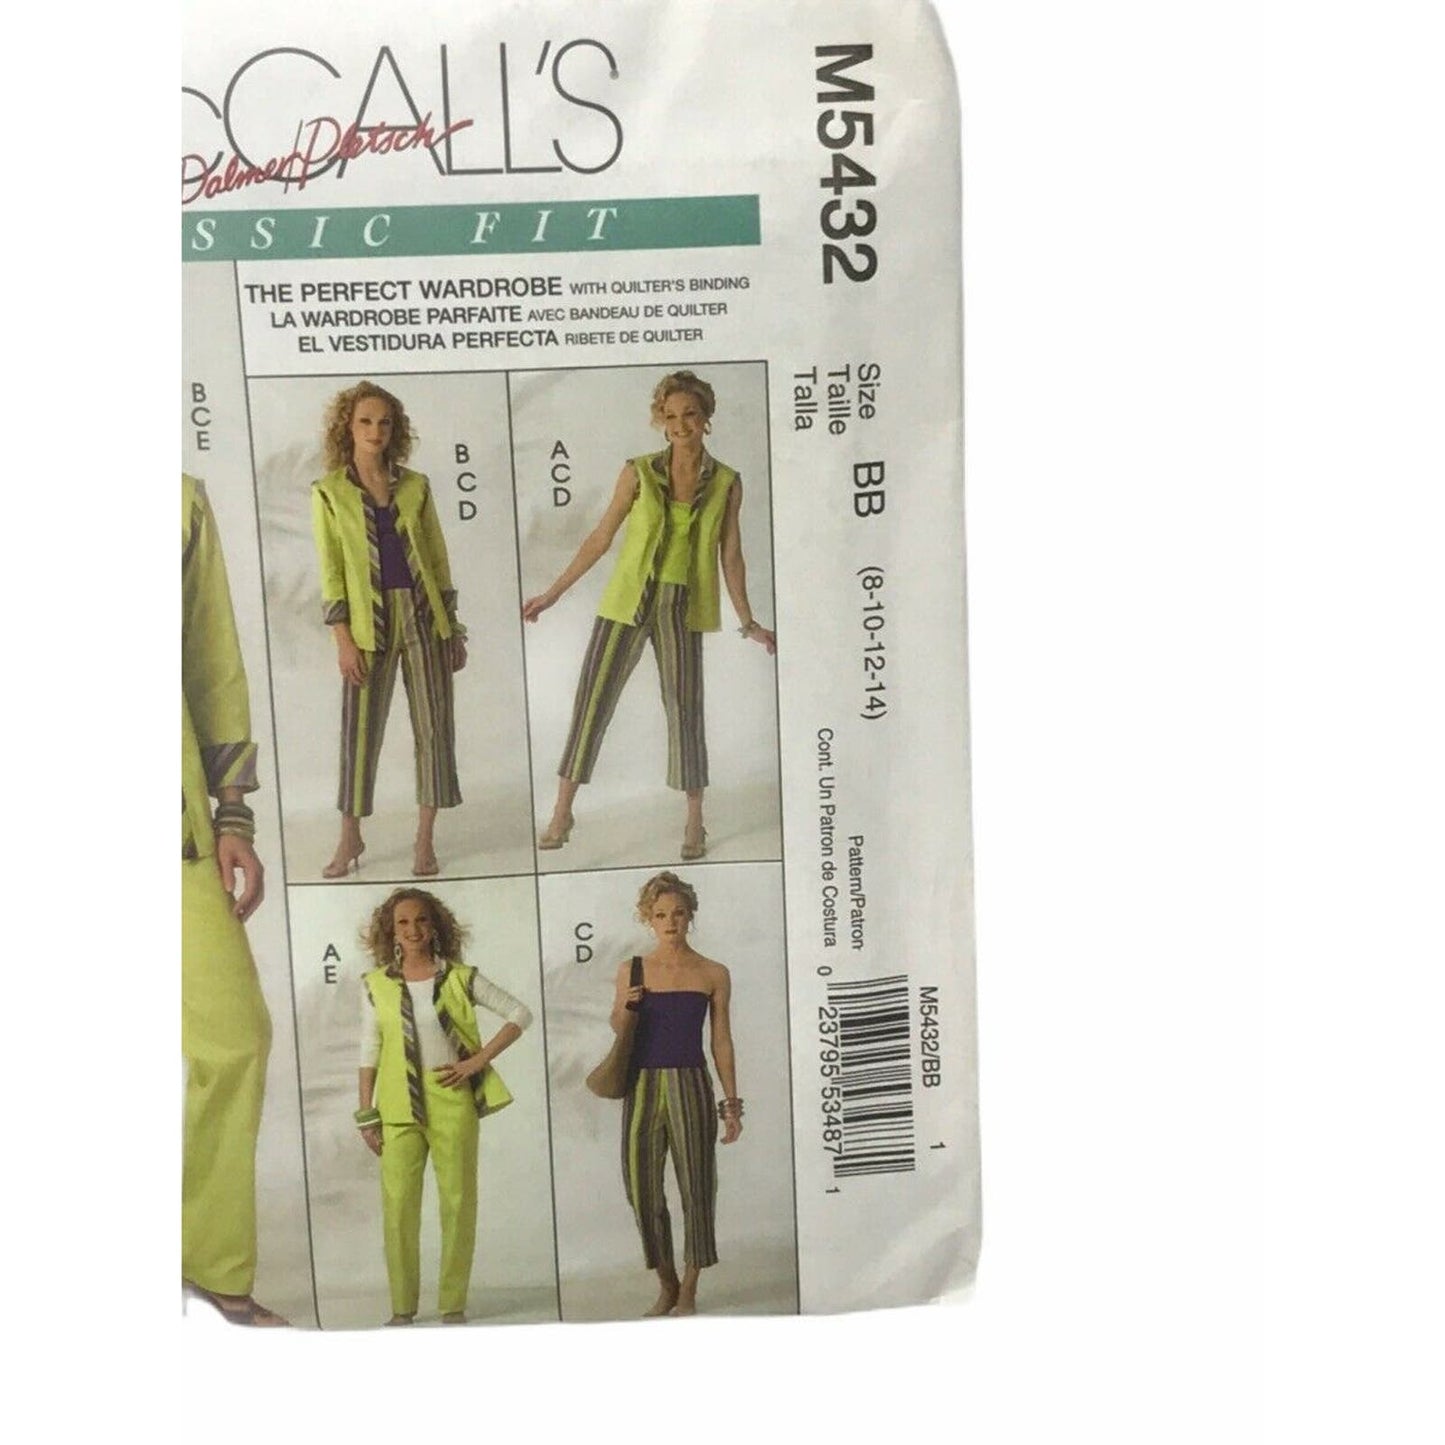 McCall M5432 VEST JACKET TOP PANT 16-24 bust 38-46 Sewing pattern 2007 Misses